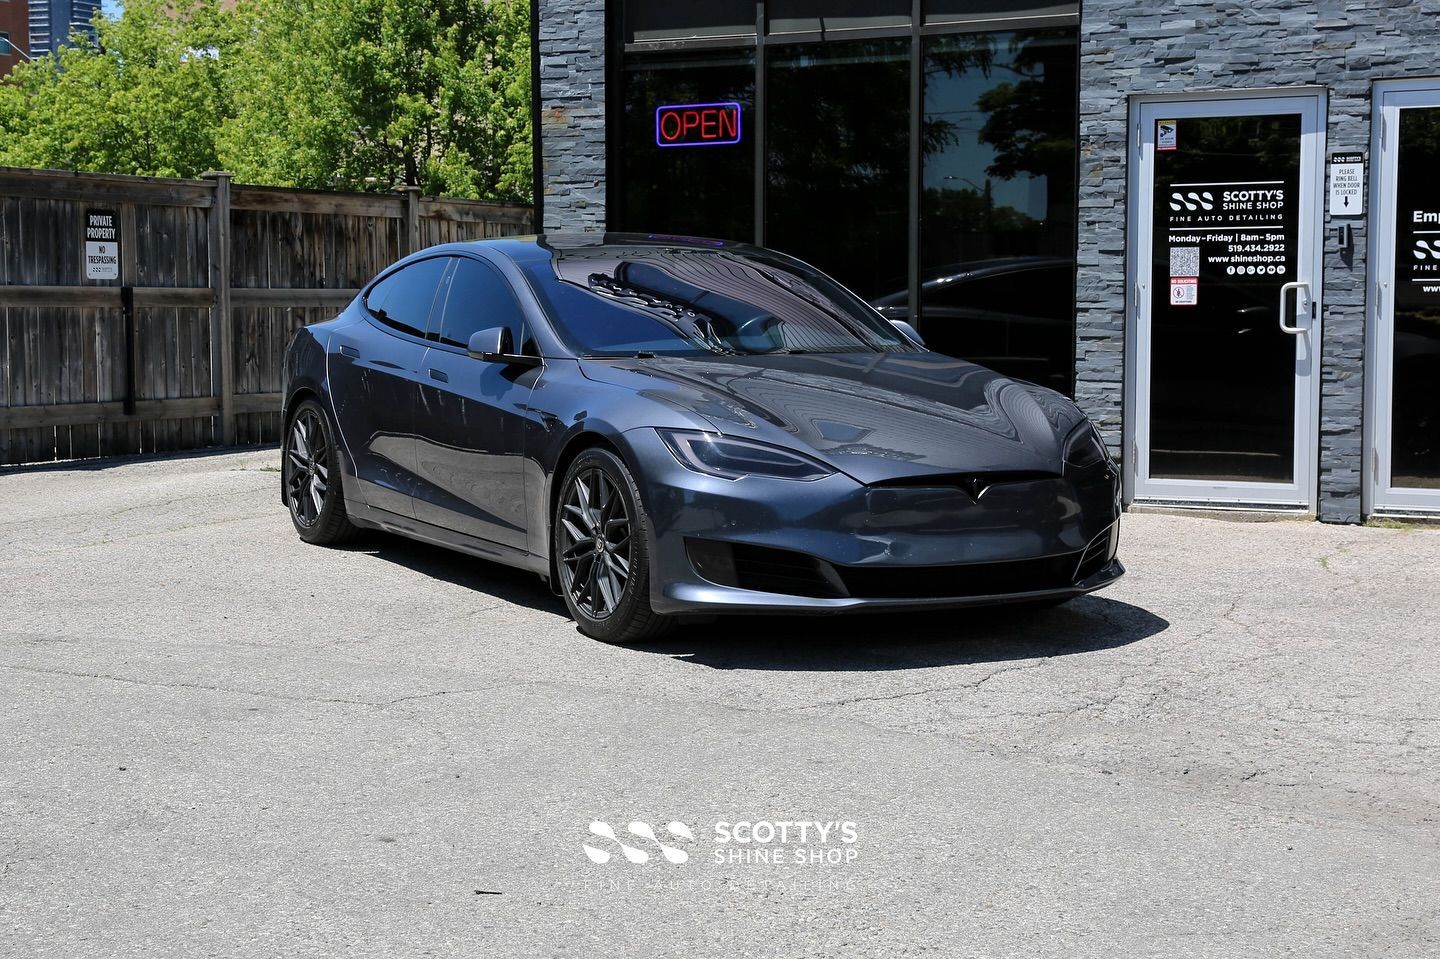 Tesla Model S at the shop for Formula 1 Pinnacle ceramic window tint! All glass protected and keepin